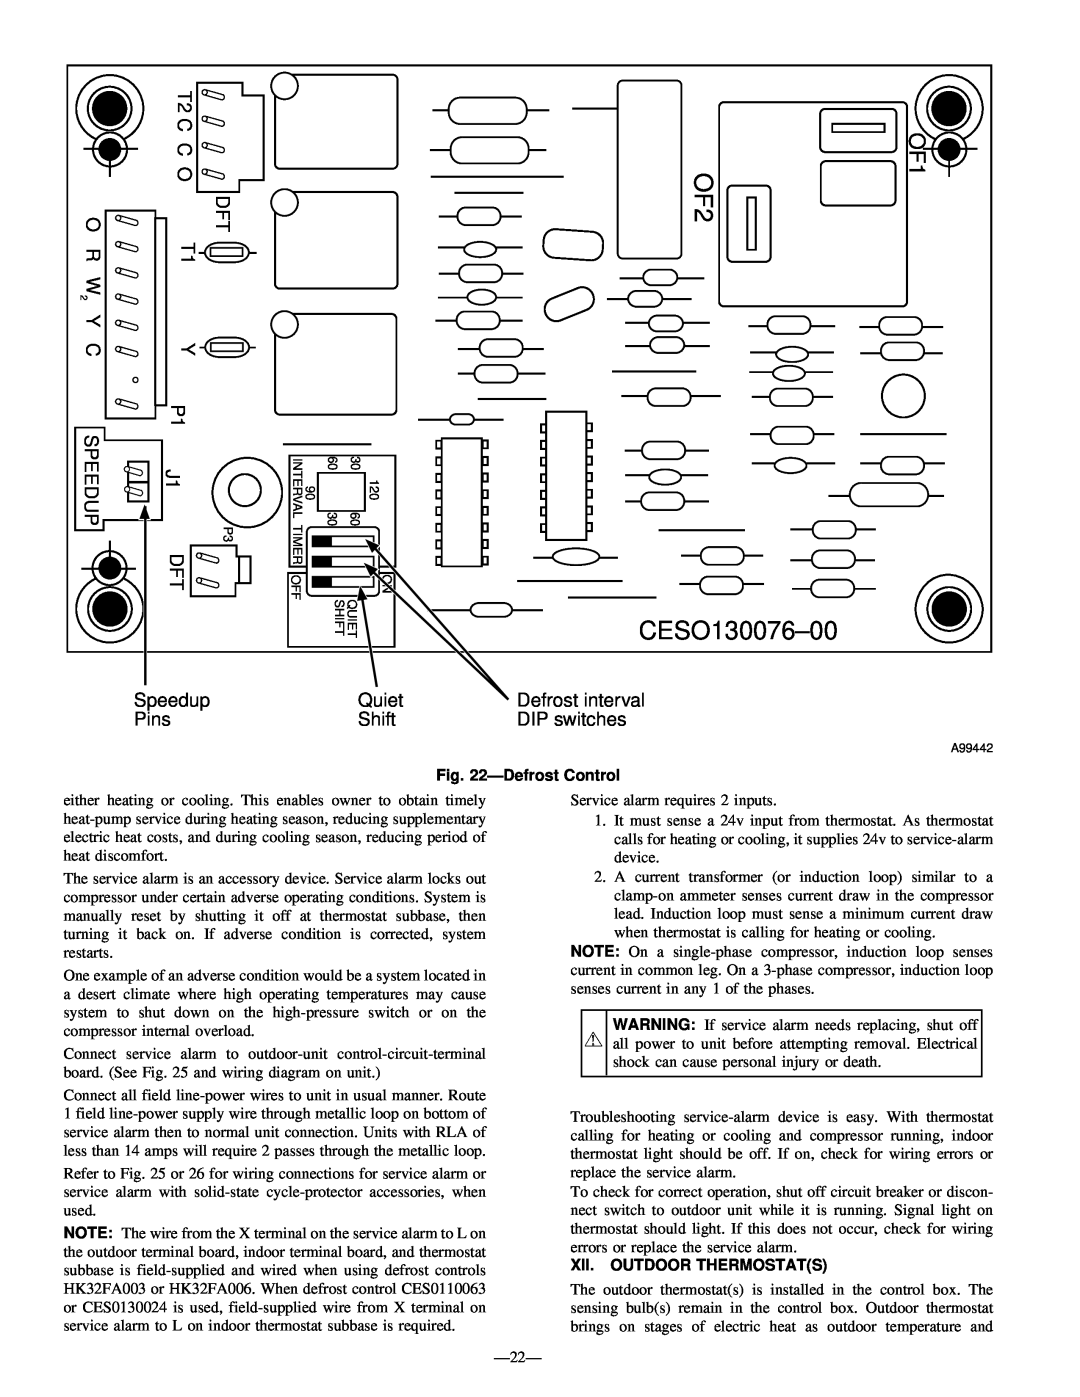 Bryant R-22 service manual OF2 CESO130076–00 